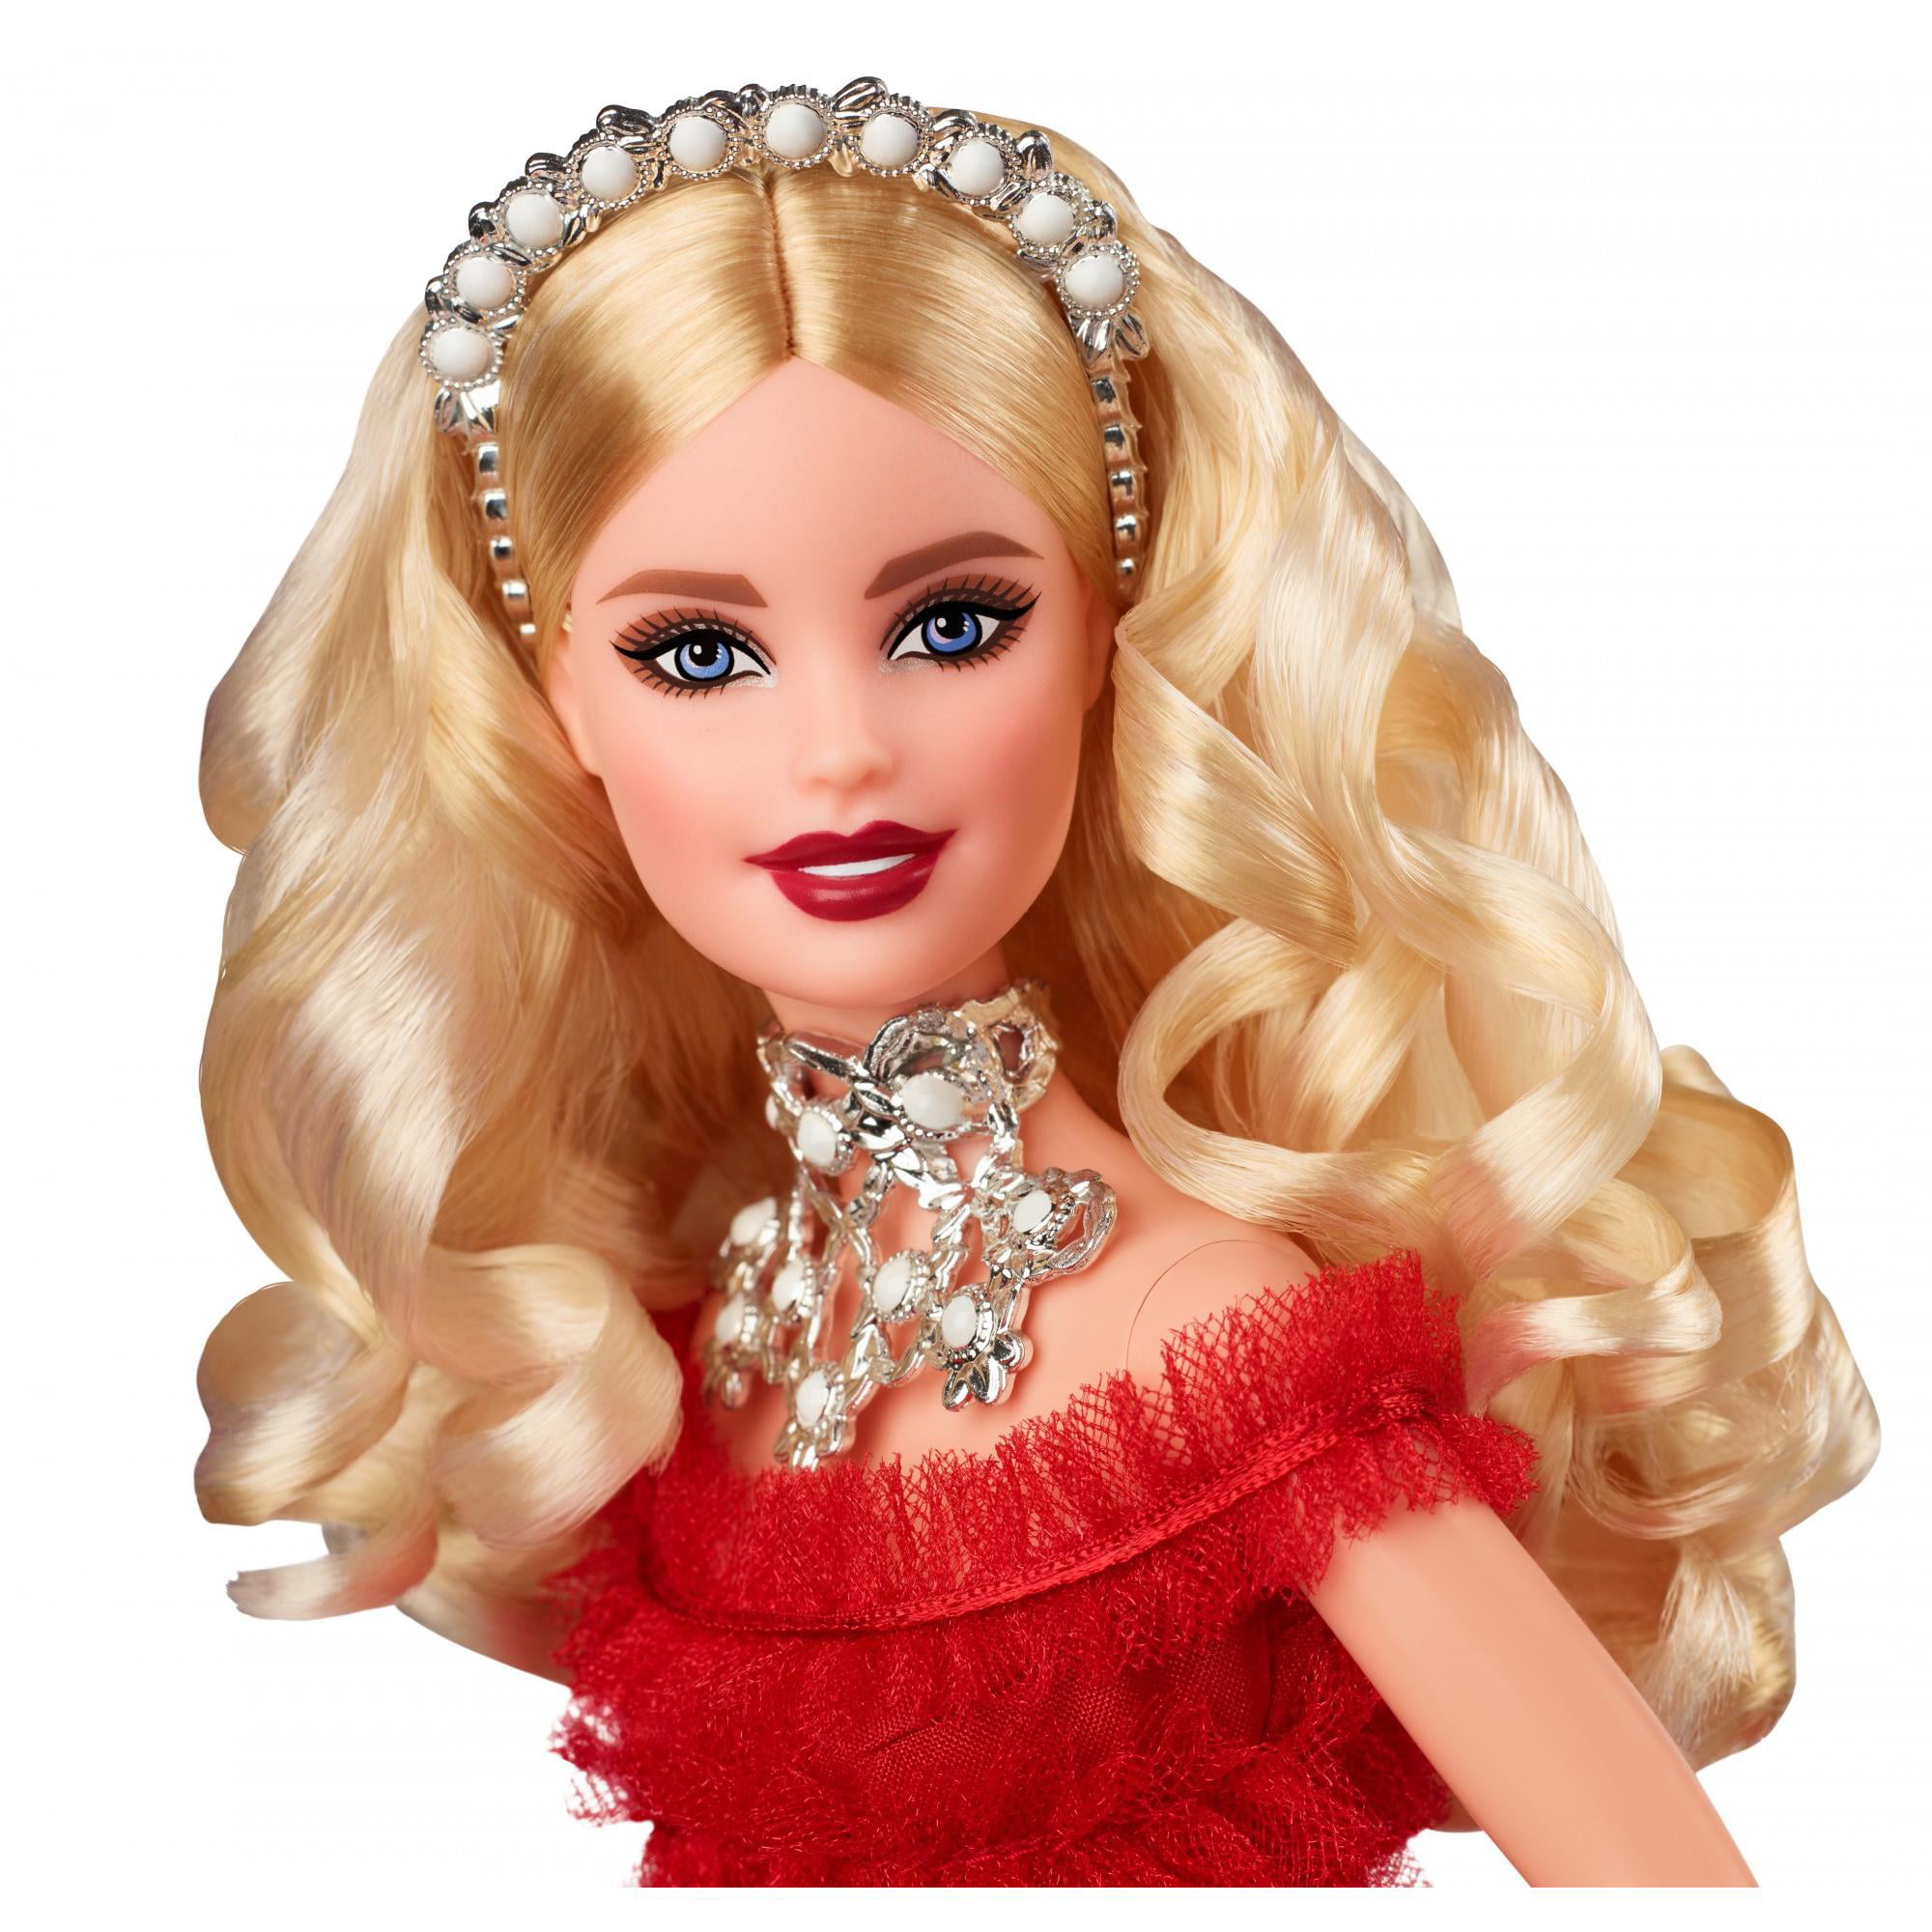 assistent Nauwgezet Investeren 2018 Holiday Collector Barbie Signature Doll with Stand - Walmart.com